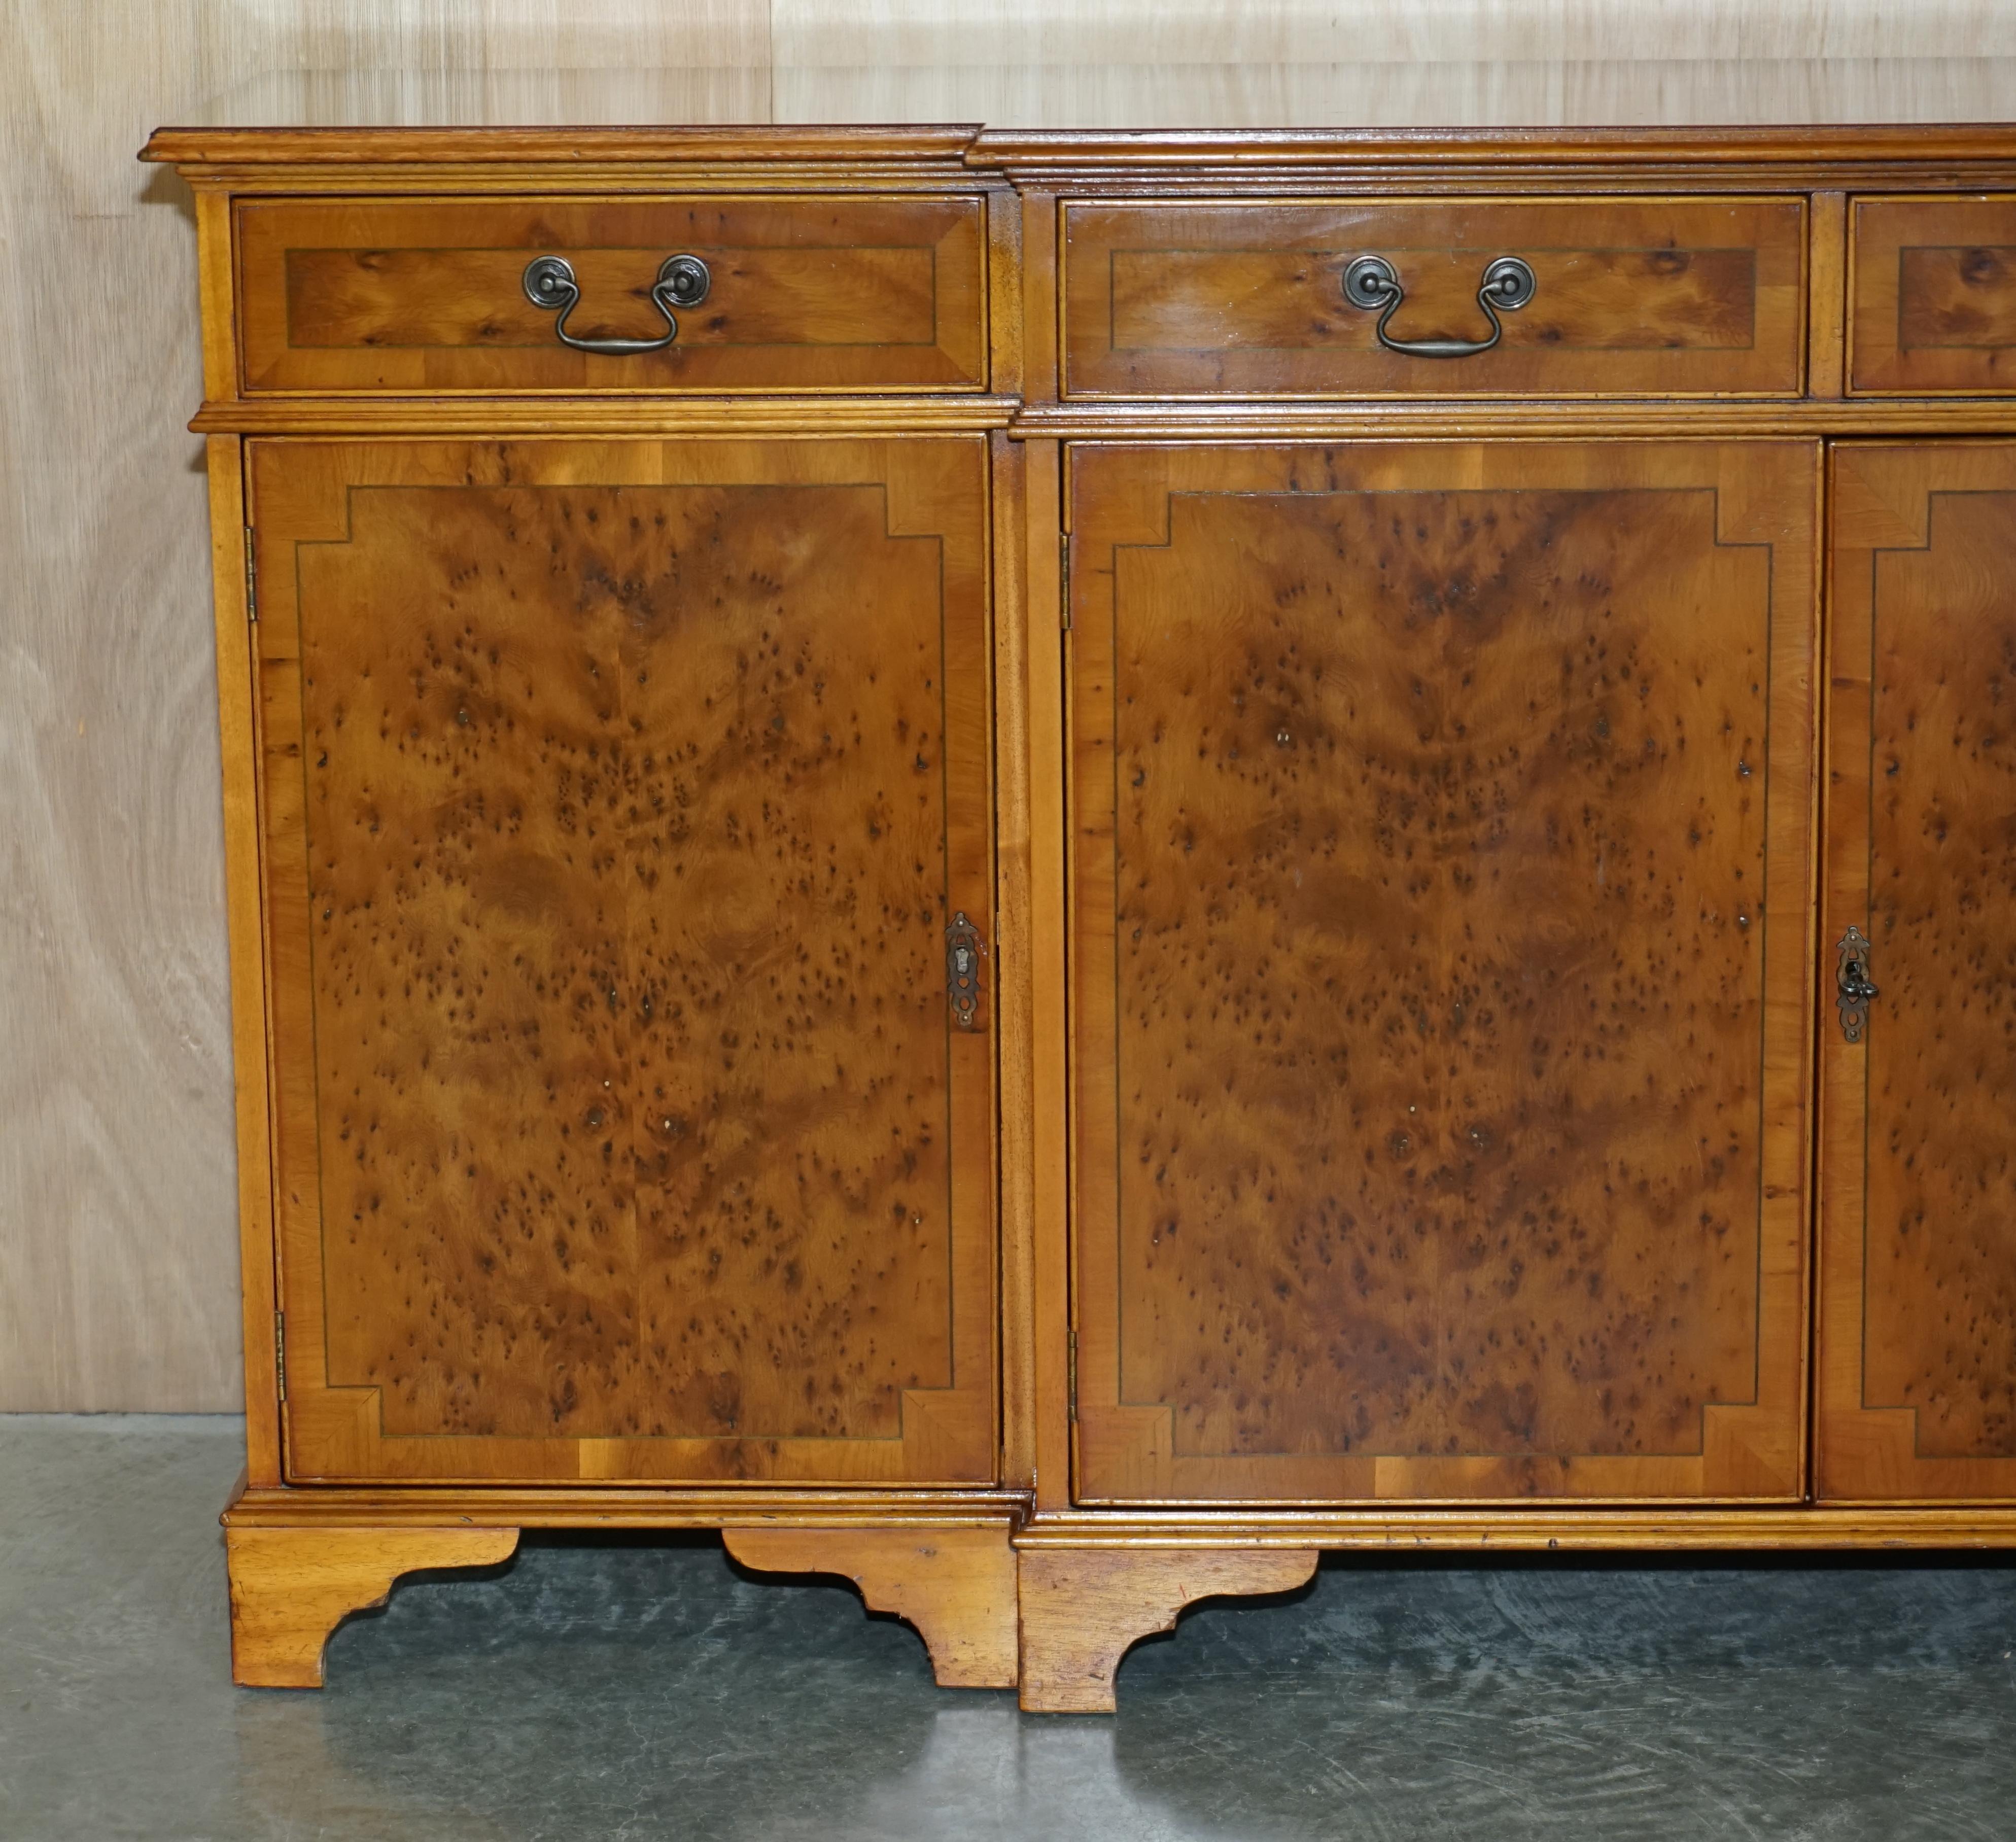 Victorian Stunning Vintage Burr Walnut Breakfront Sideboard with Four Large Drawers